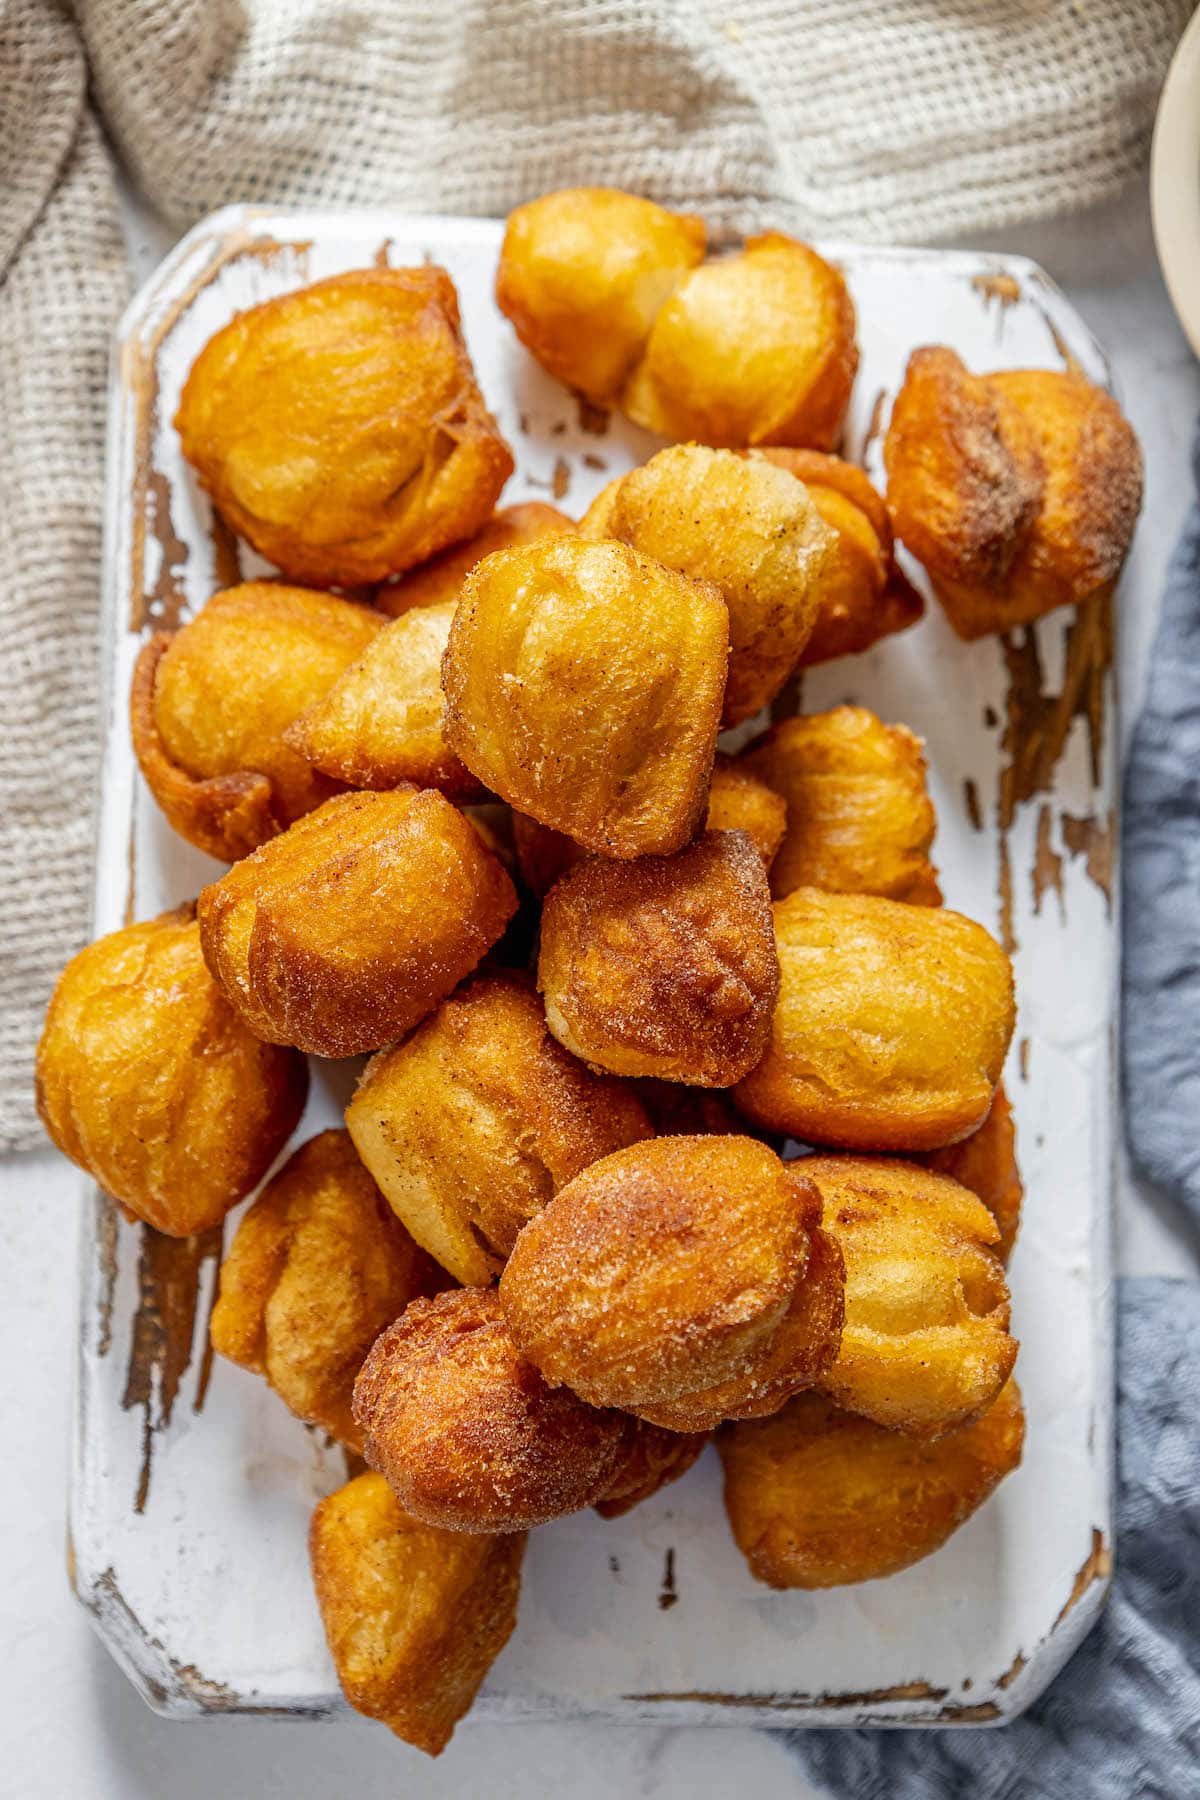 A plate of fried doughnuts on a table, also known as fried cinnamon biscuits.